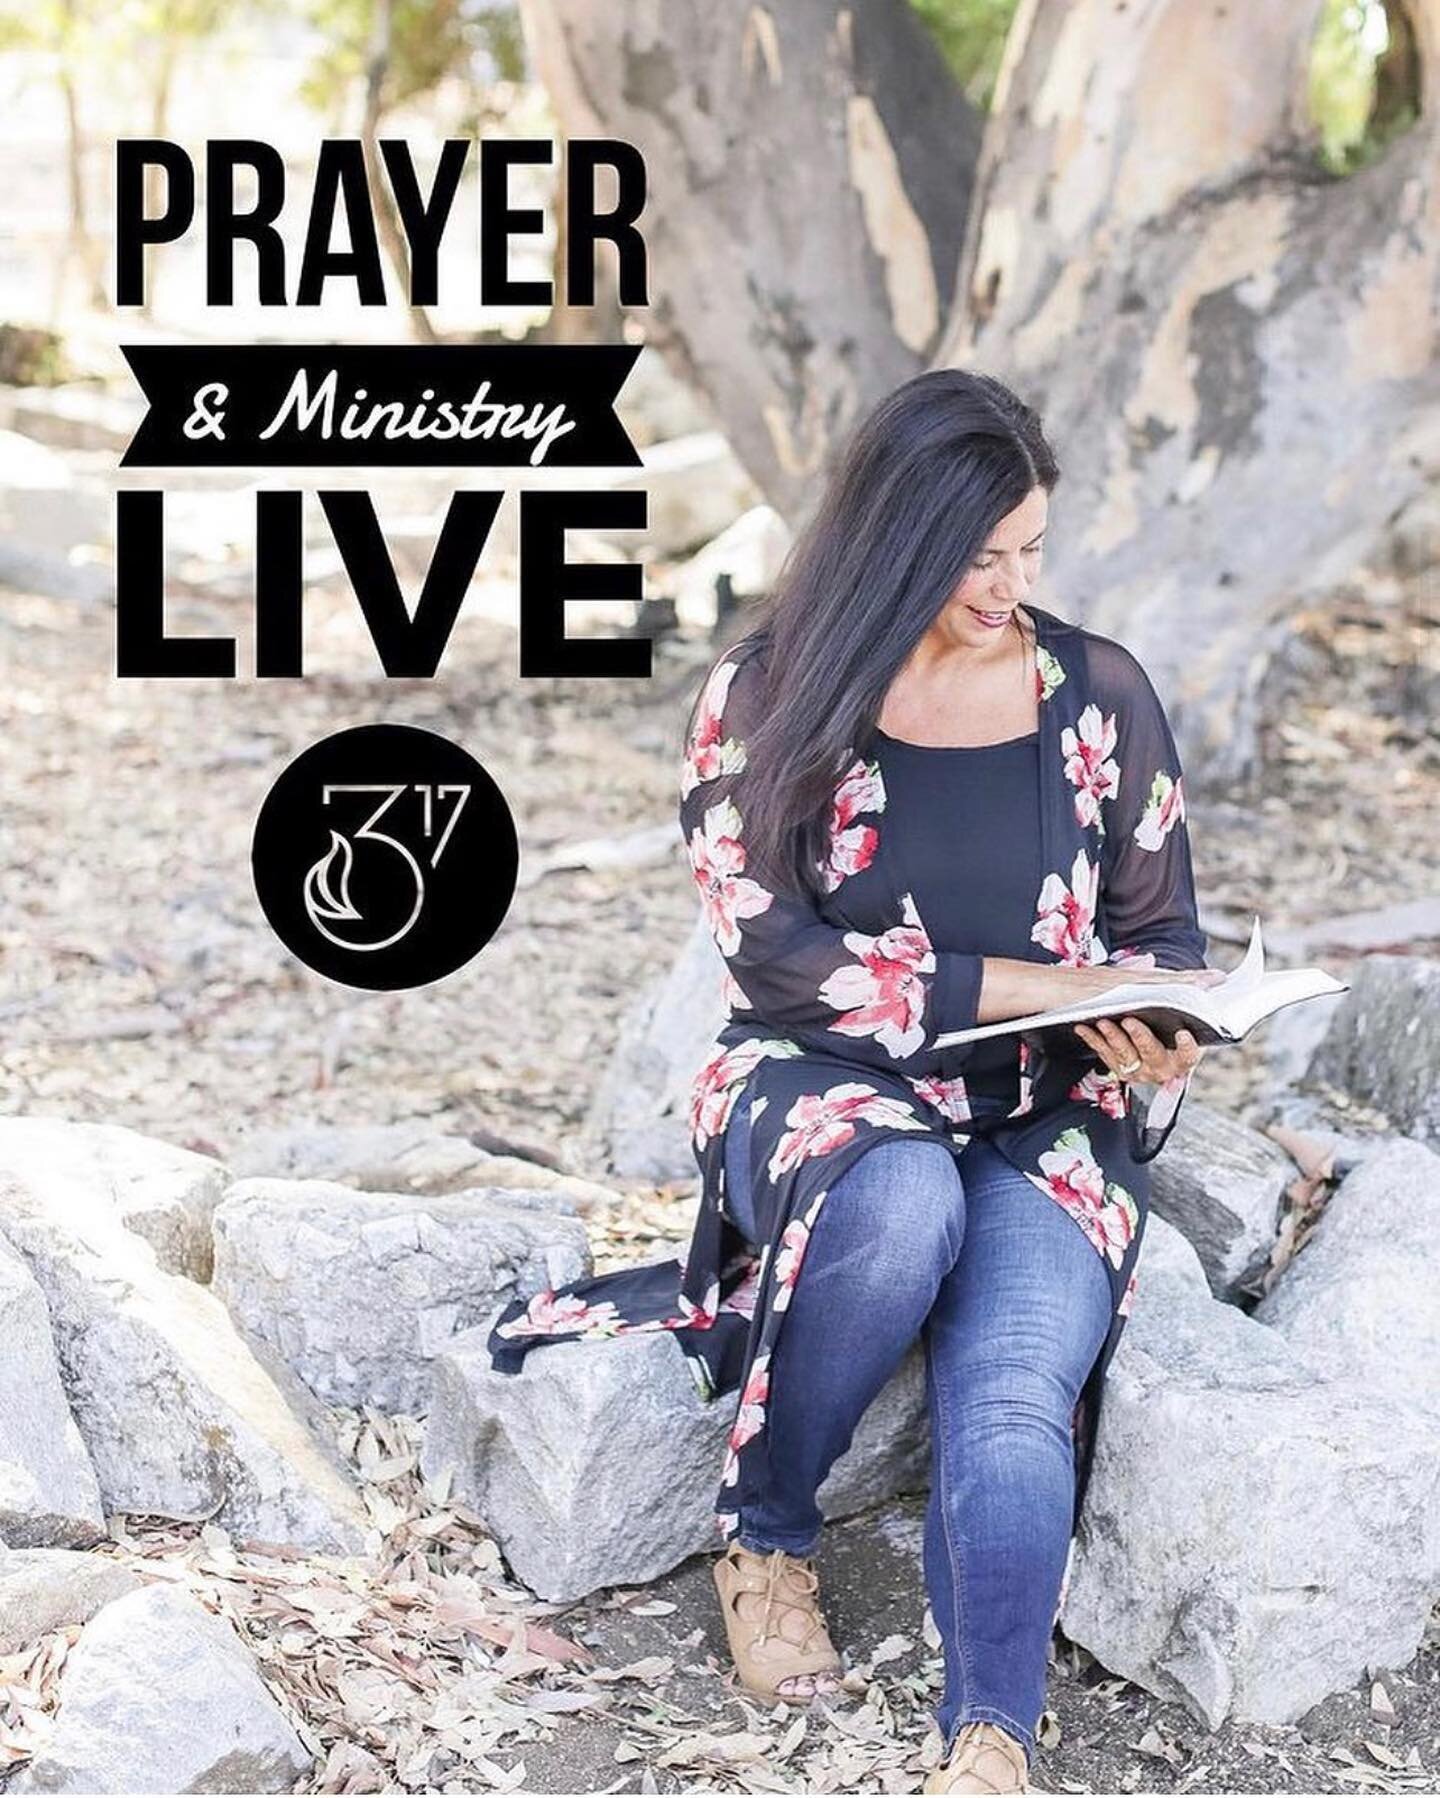 It&rsquo;s TUESDAY! Join us LIVE at 12:30 PST to get INFUSED by God&rsquo;s presence &amp; power on  @317freedom Facebook Page for #transformationtuesday as we pray, prophesy &amp; share a time of FREEDOM ministry! 🔥

🙏🏼Post your name or tag someo